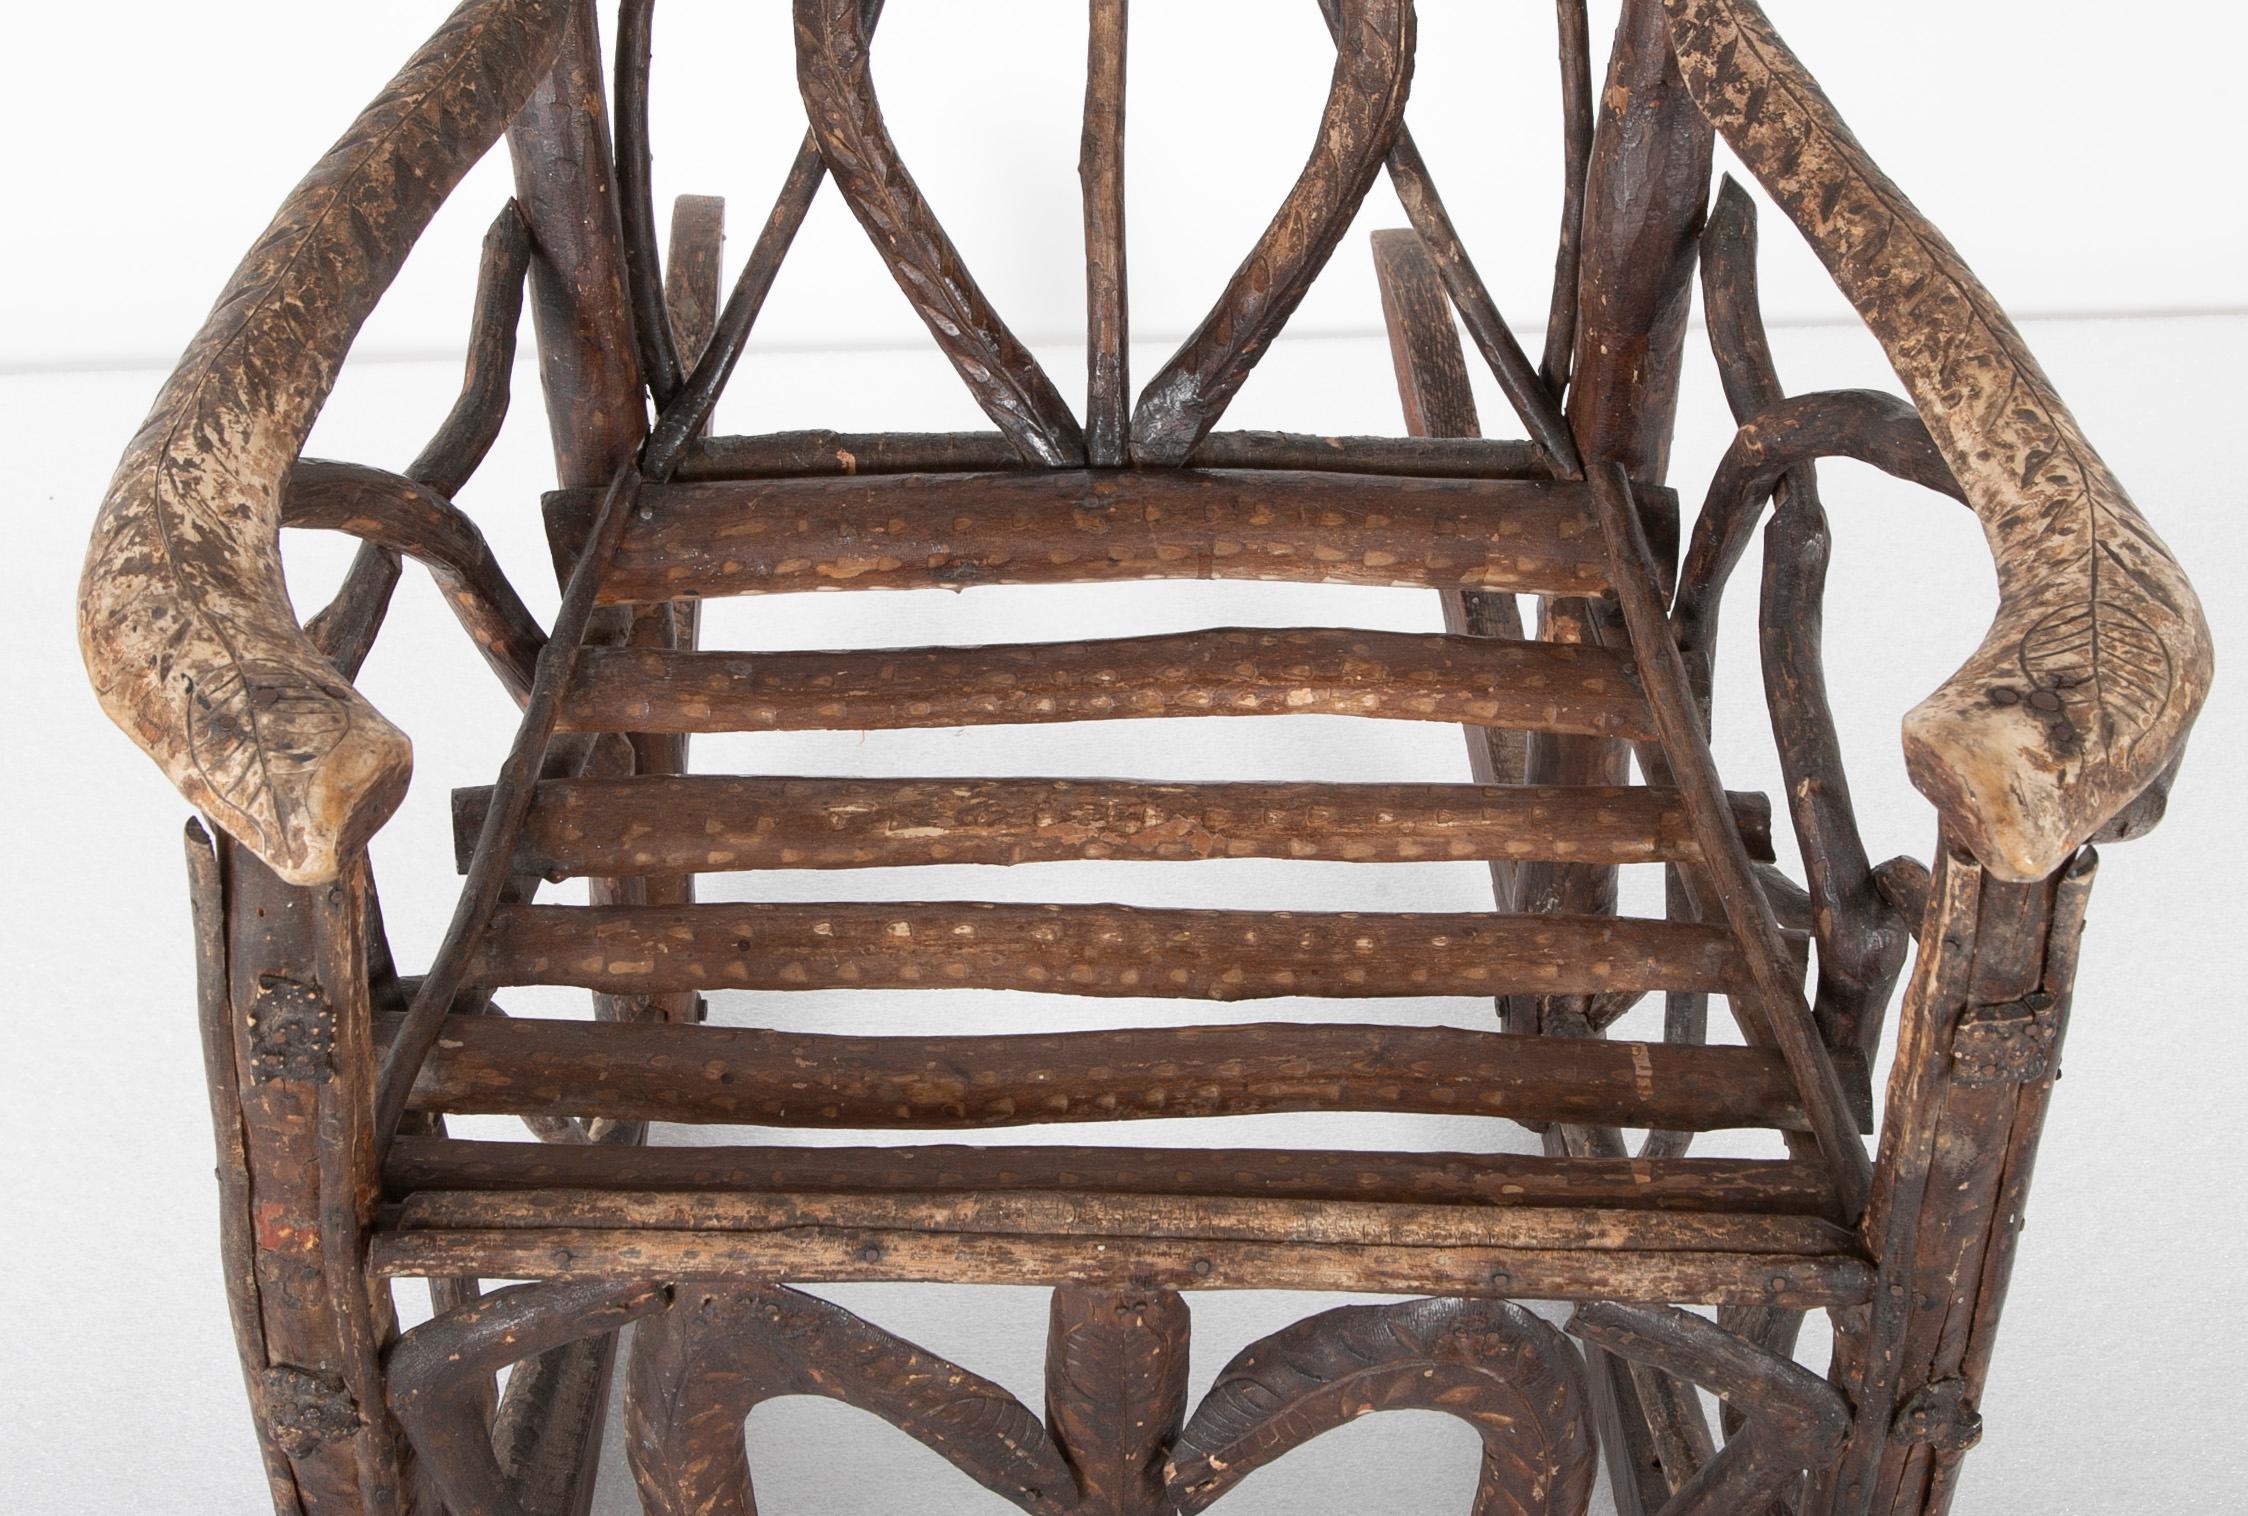 20th Century Rustic Rocking Chair Attributed to Rev. Ben Davis of Blowing Rock, NC